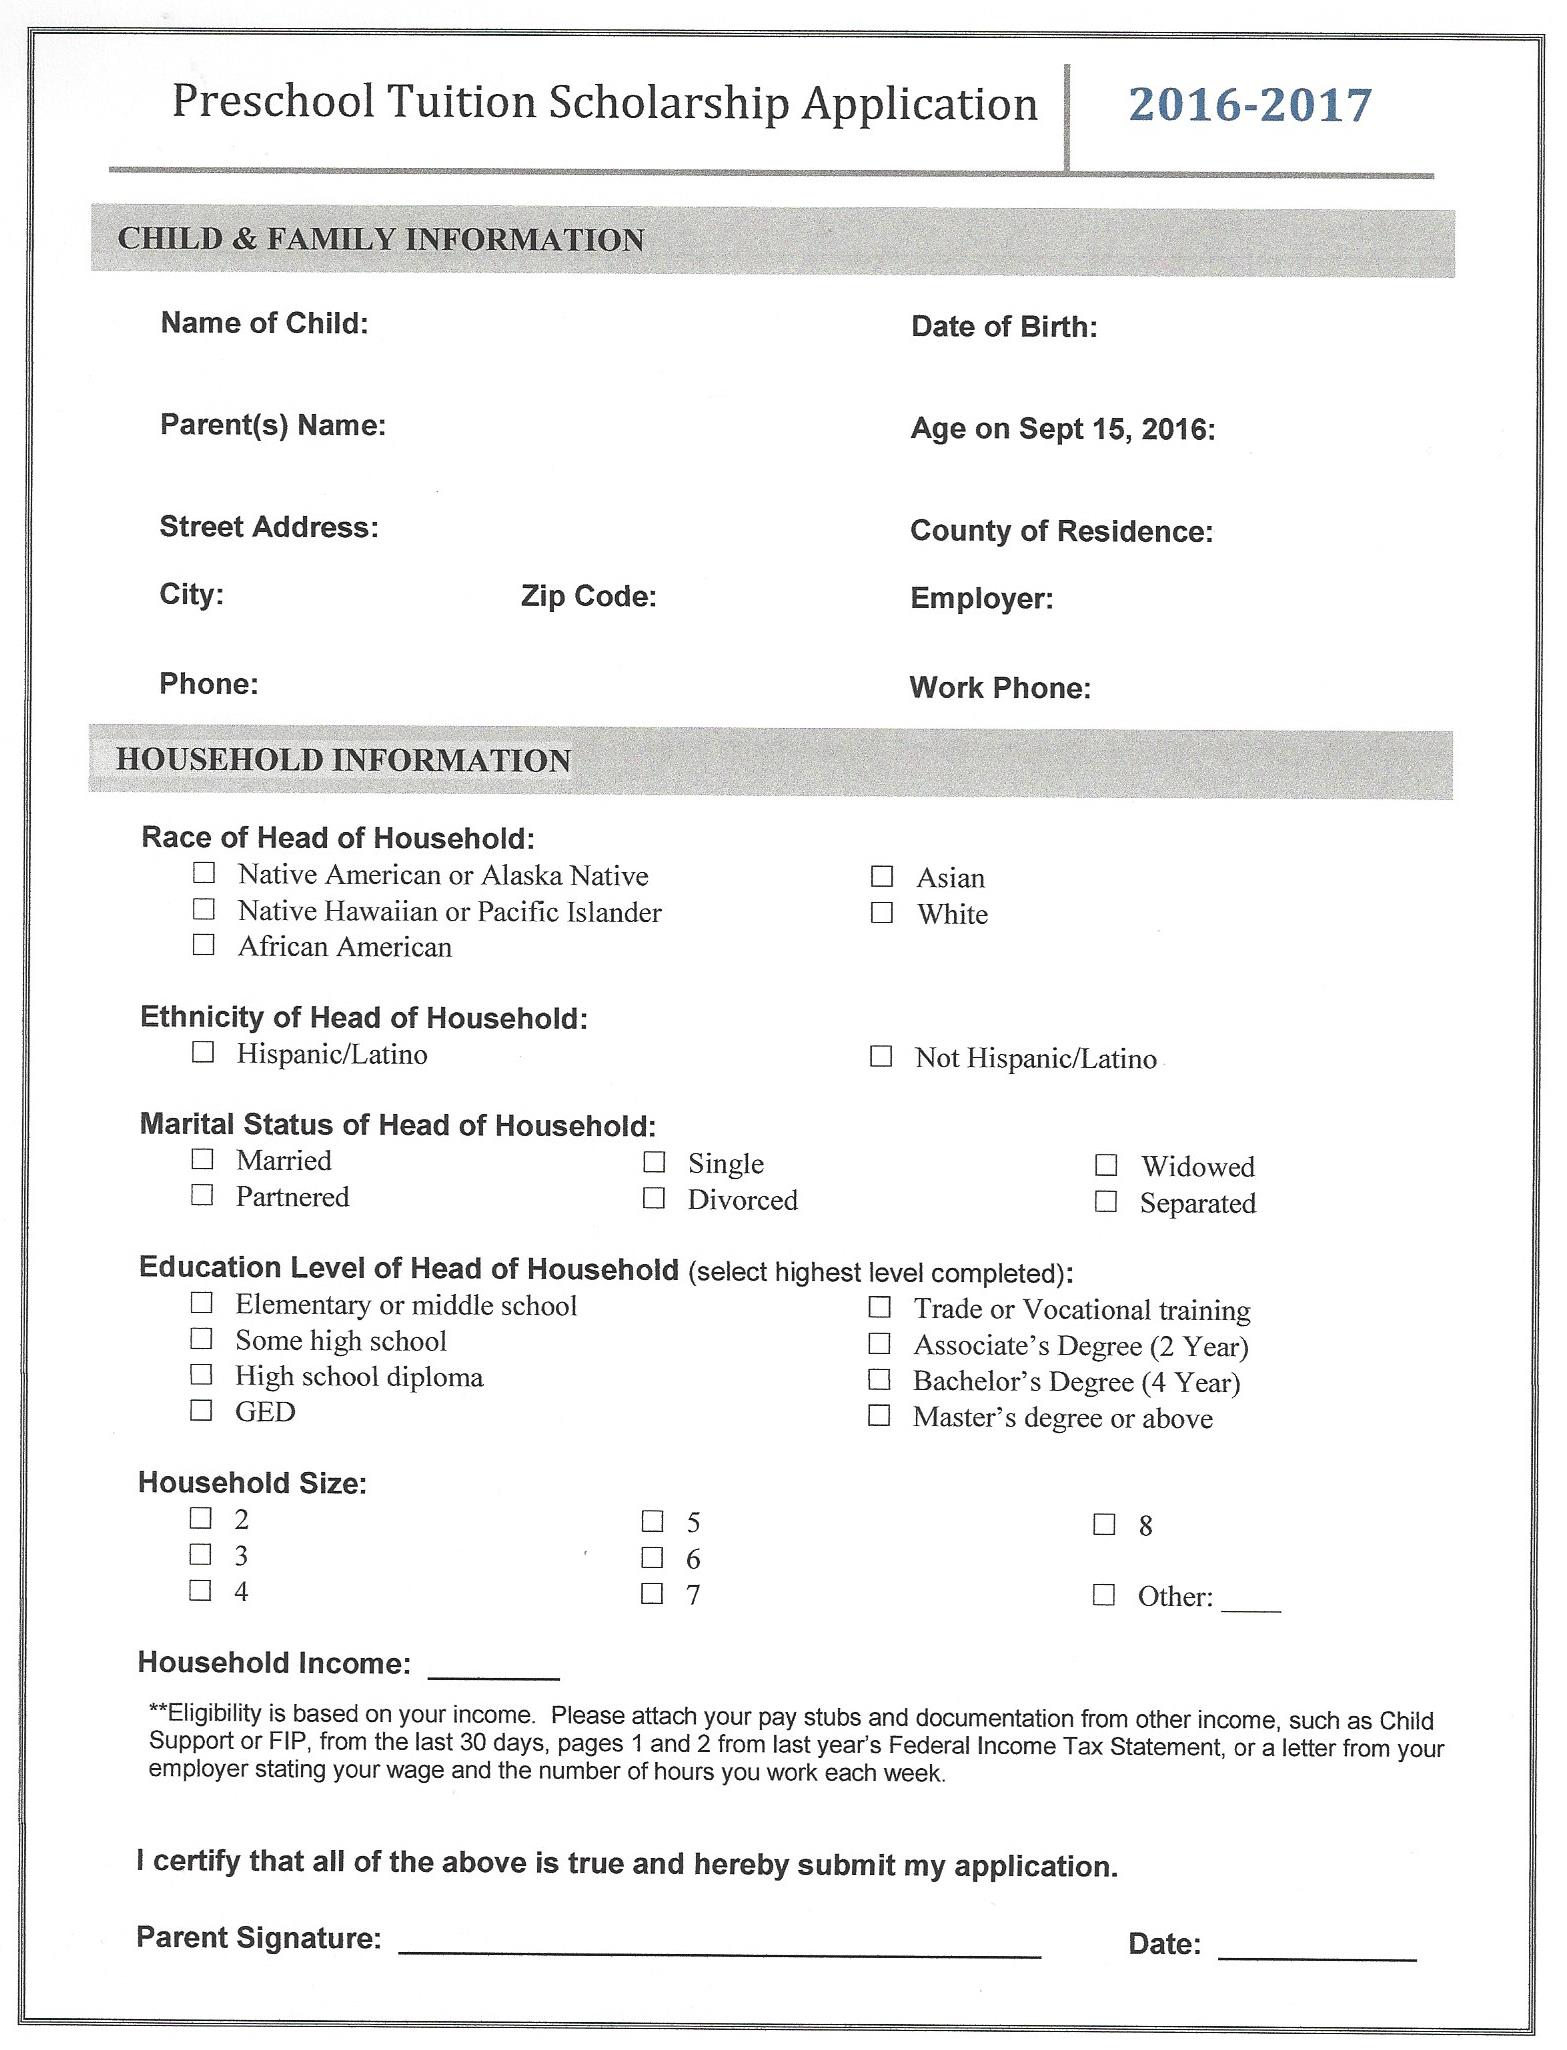 Preschool Tuition Scholarship Application Front Page